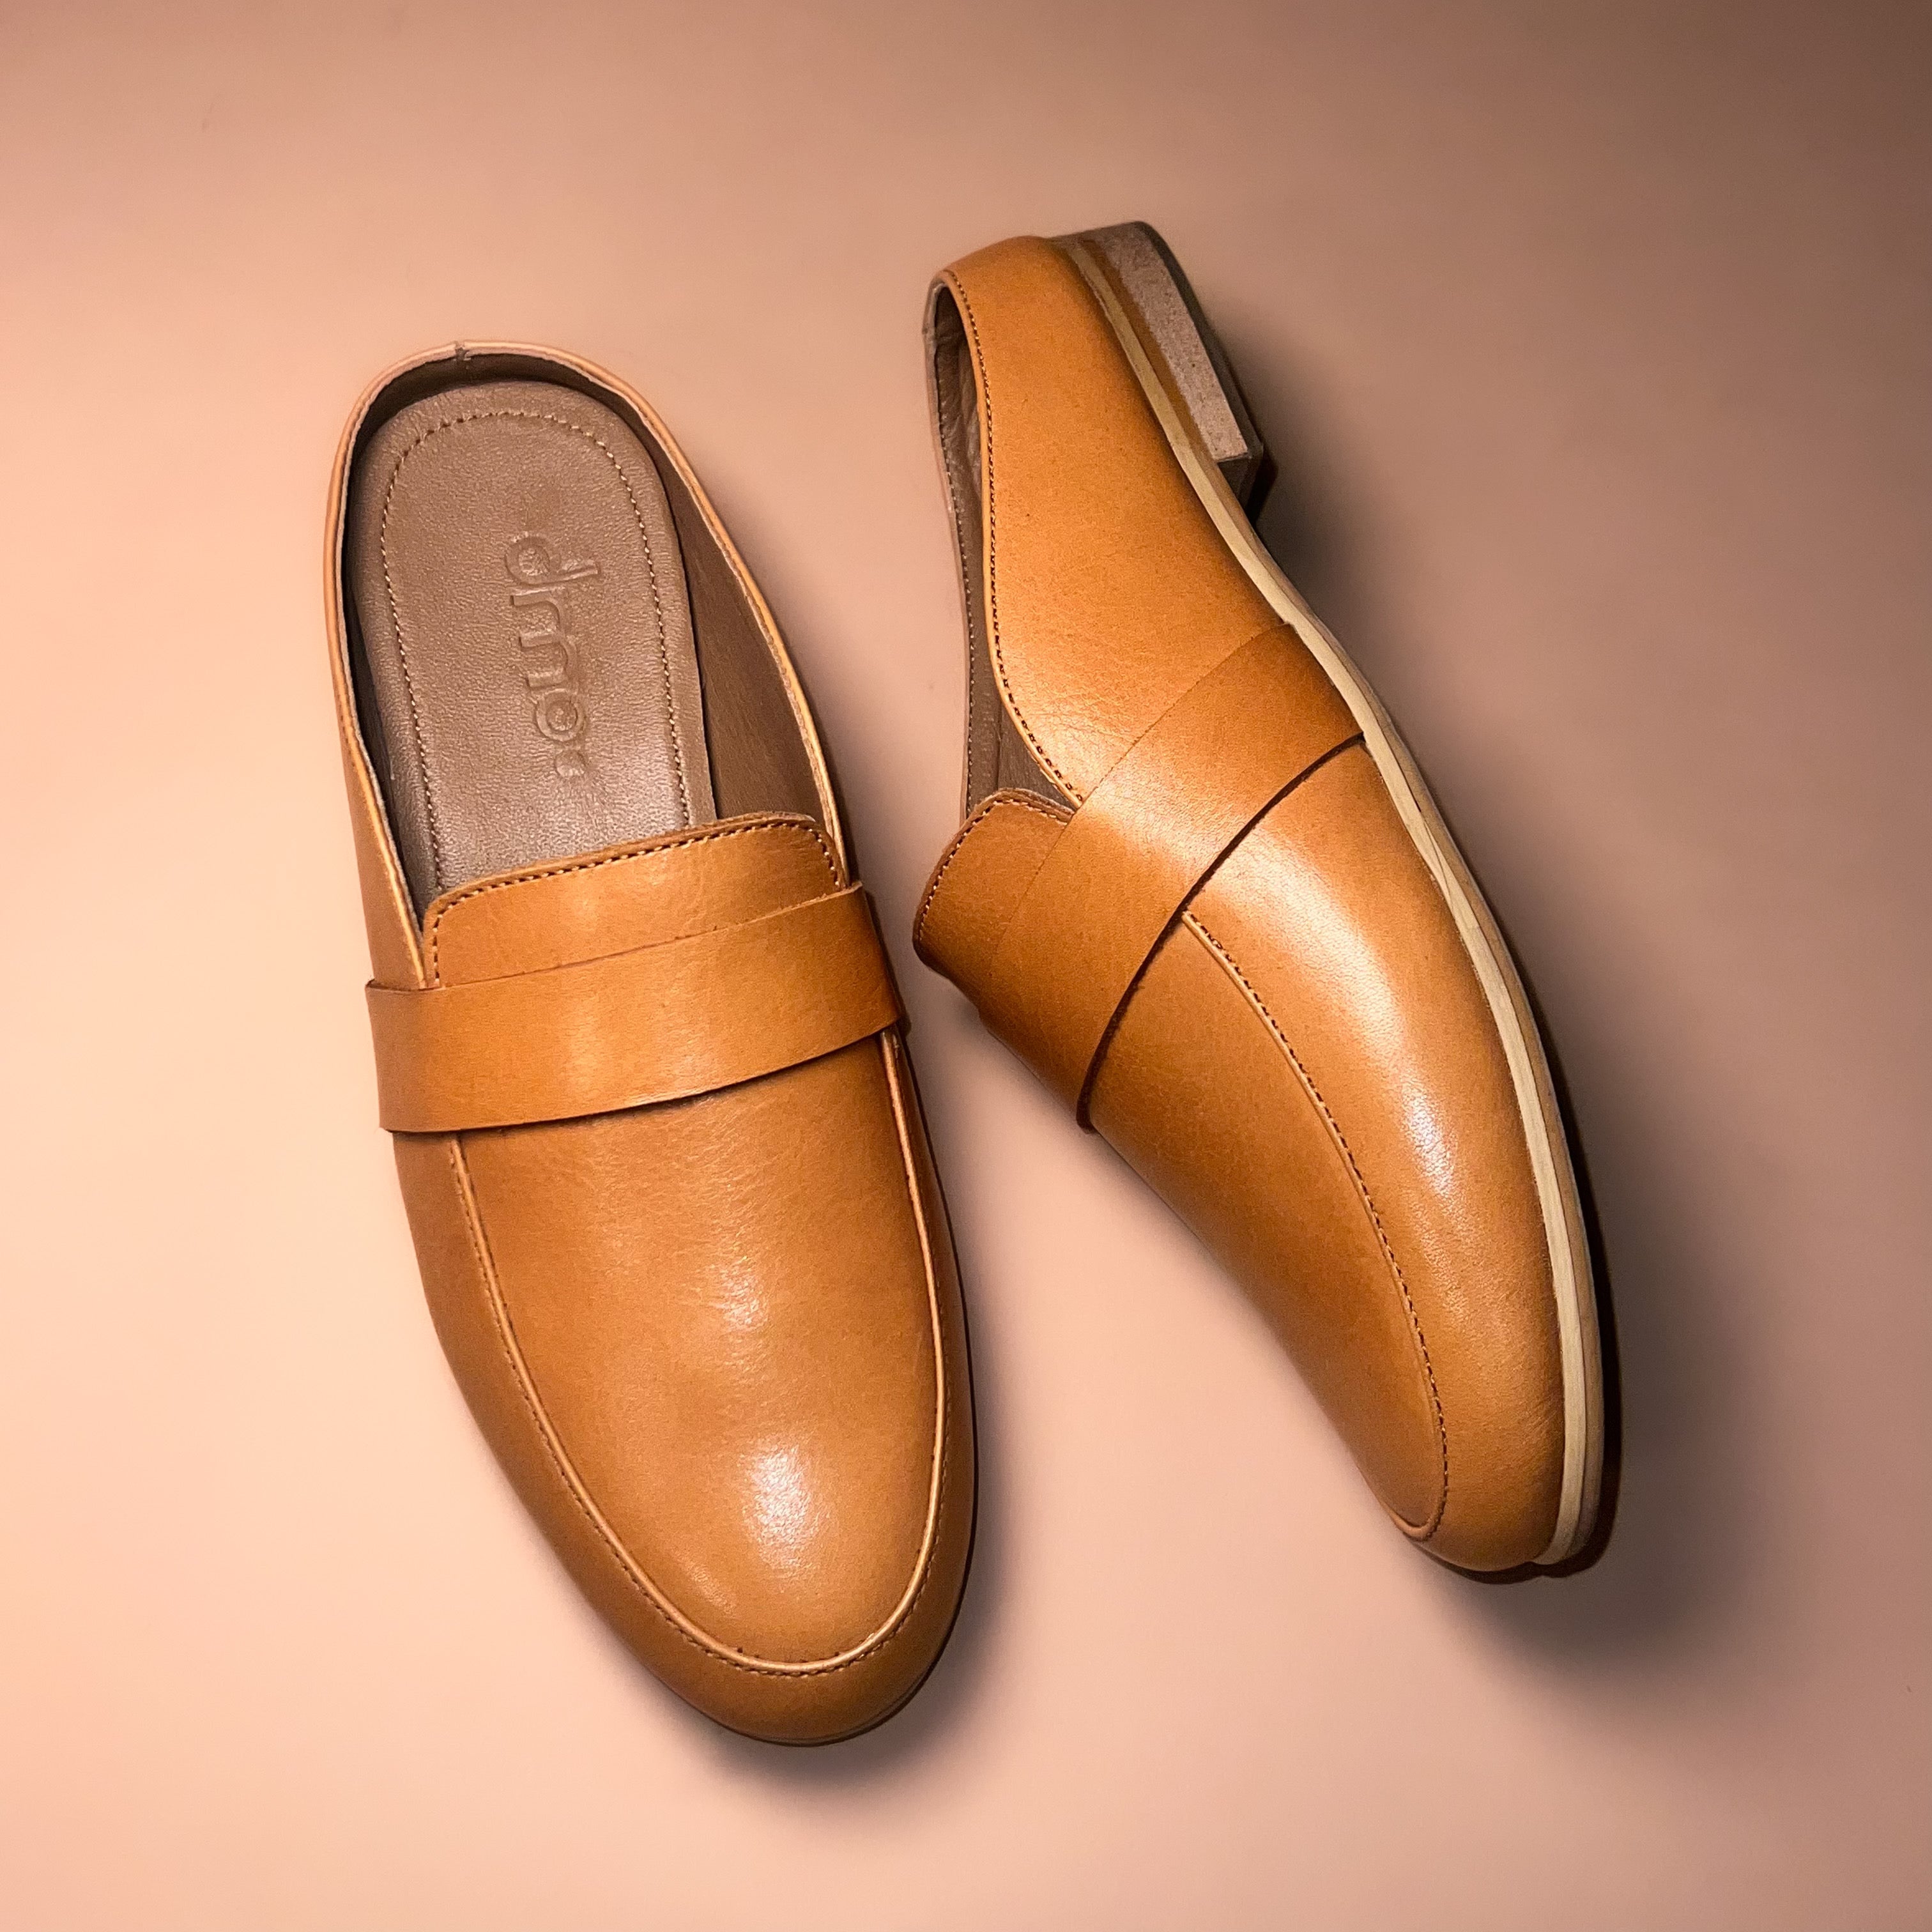 Women's tan leather mules by dmodot - Comfortable office footwear with full-bodied front, chic vamp, and memory cushion.